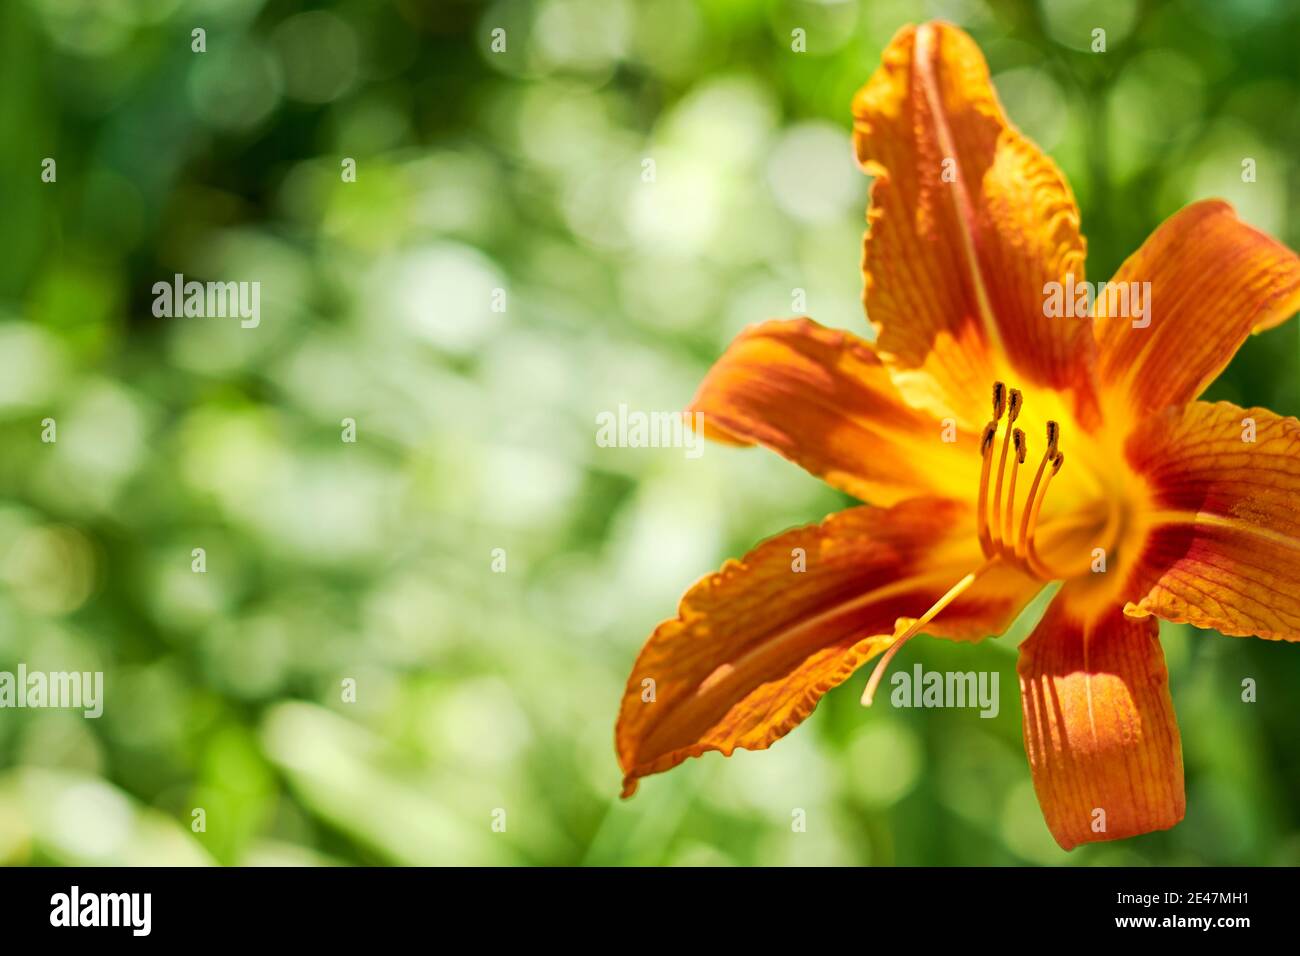 Elegant vivid orange lily on the blurred green background. Flowers in the wild Stock Photo